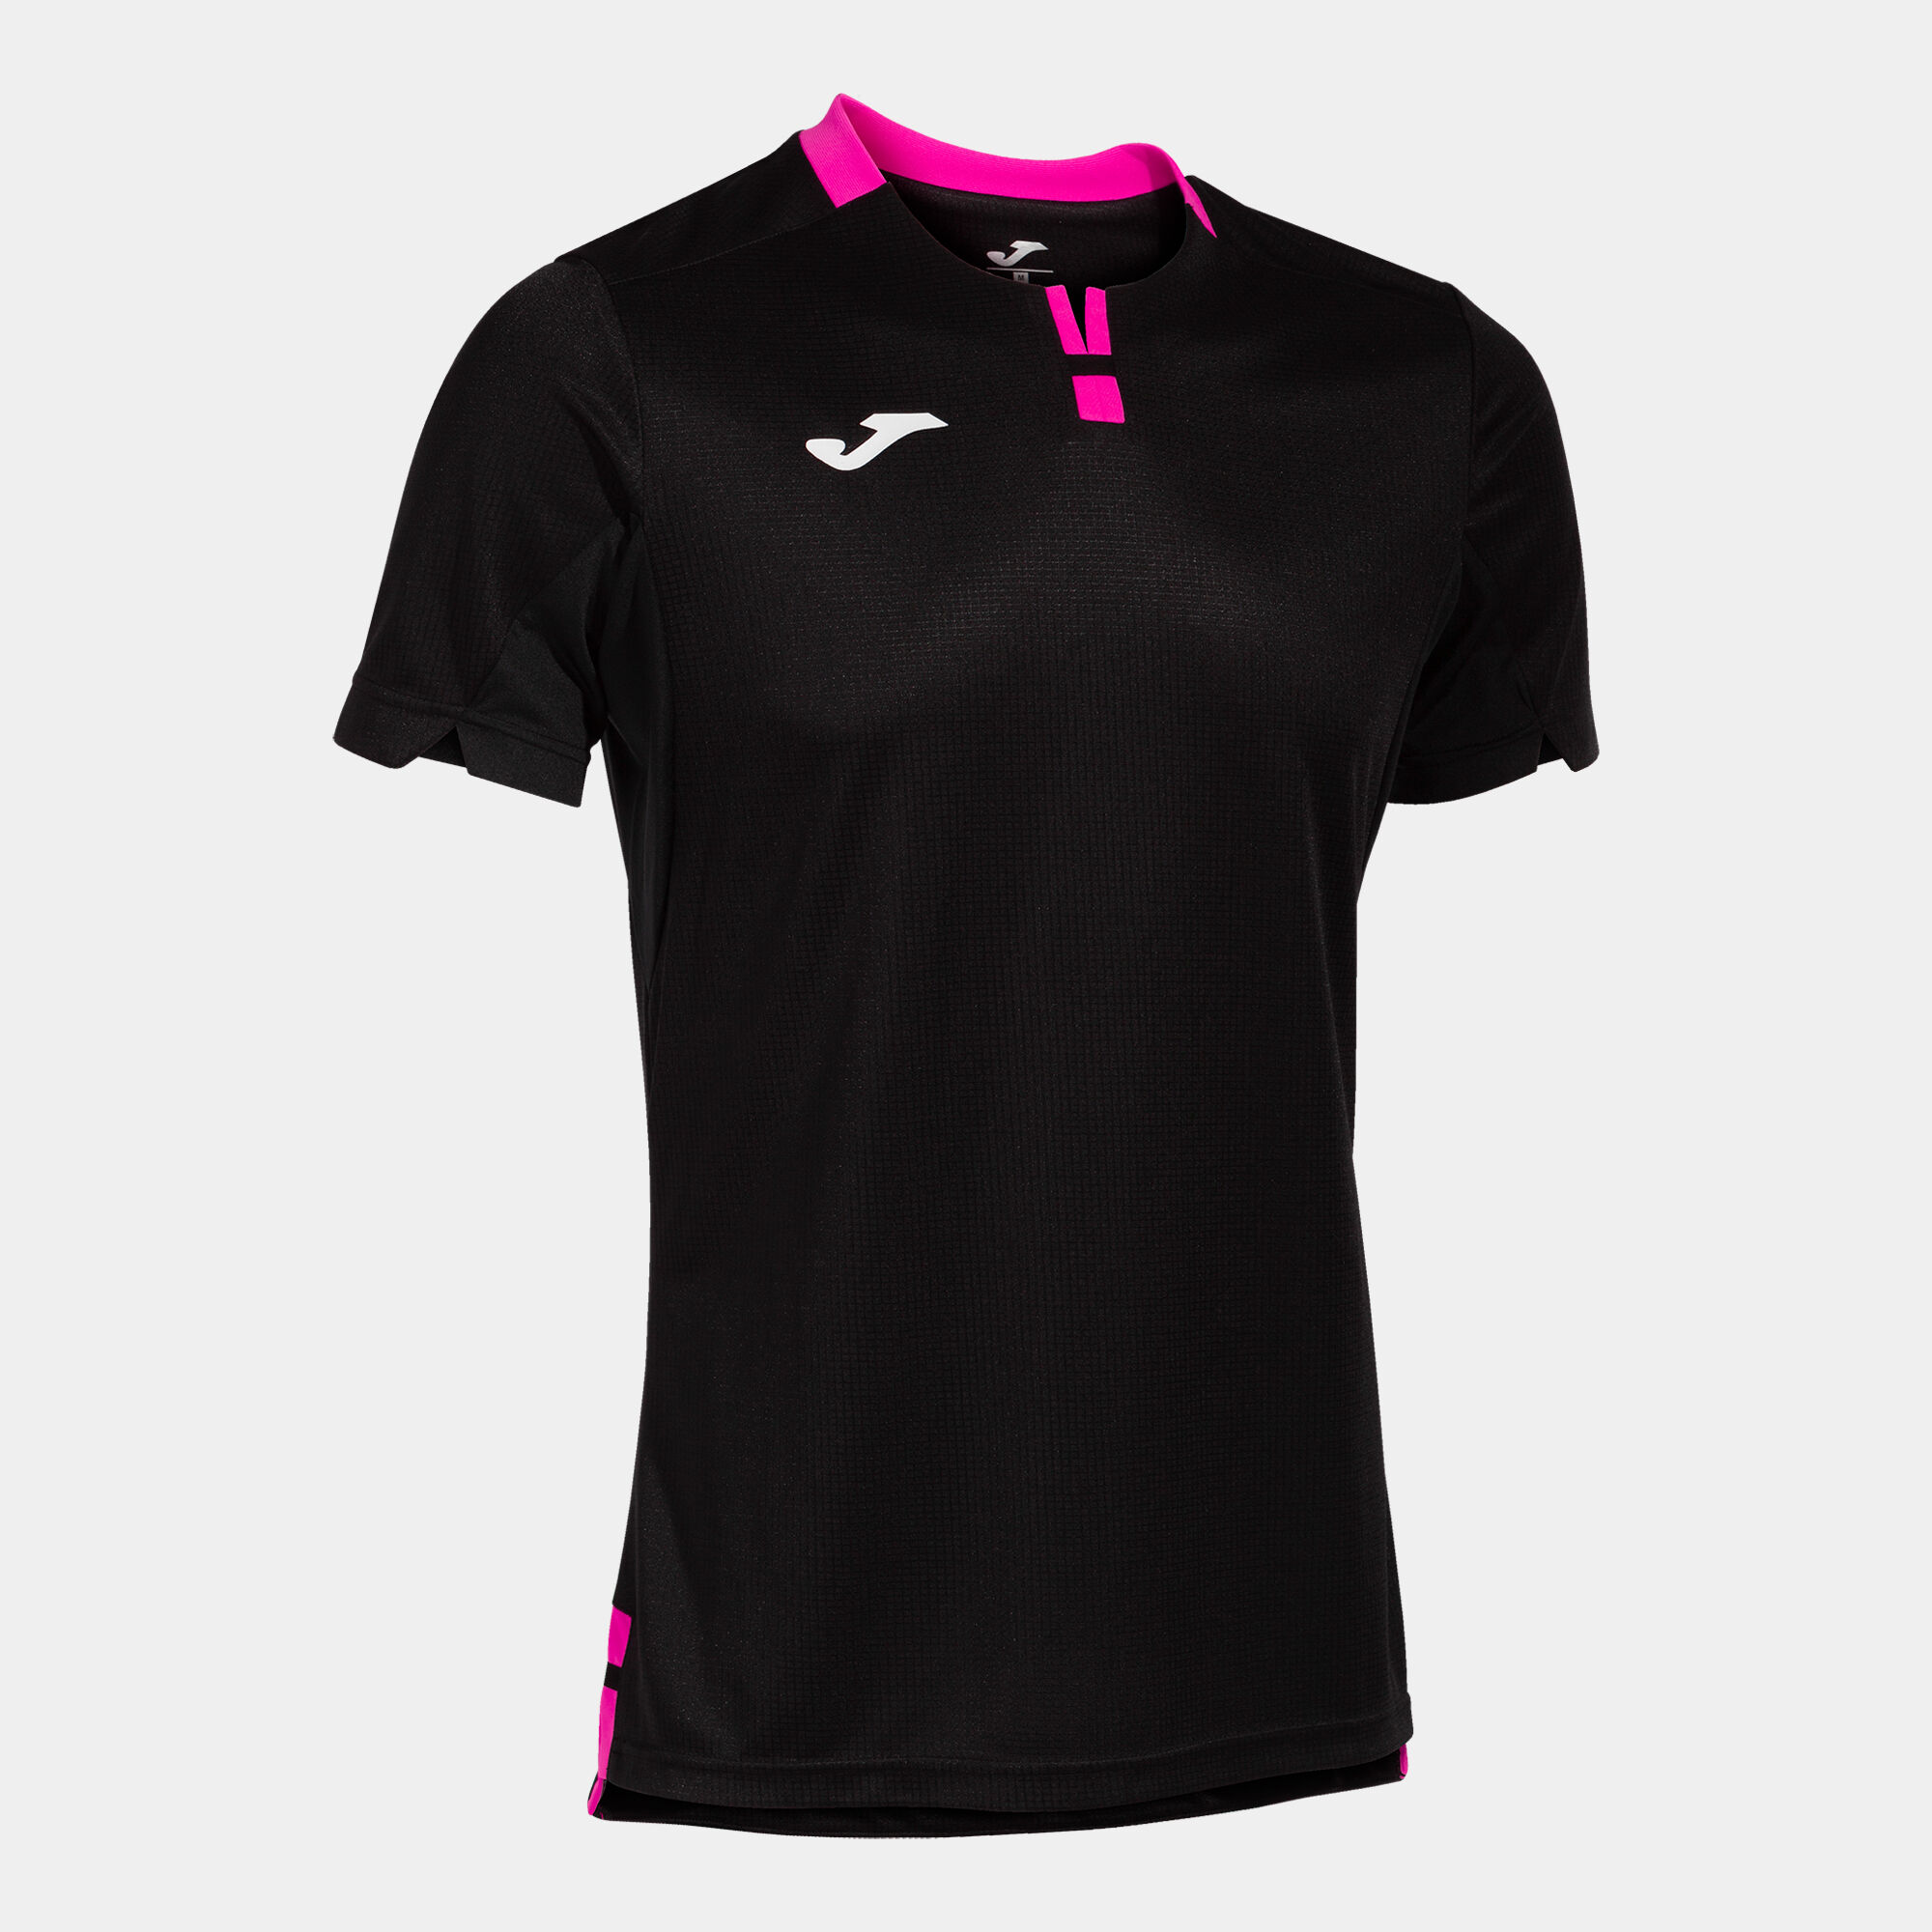 Maillot manches courtes homme Ranking noir rose fluo